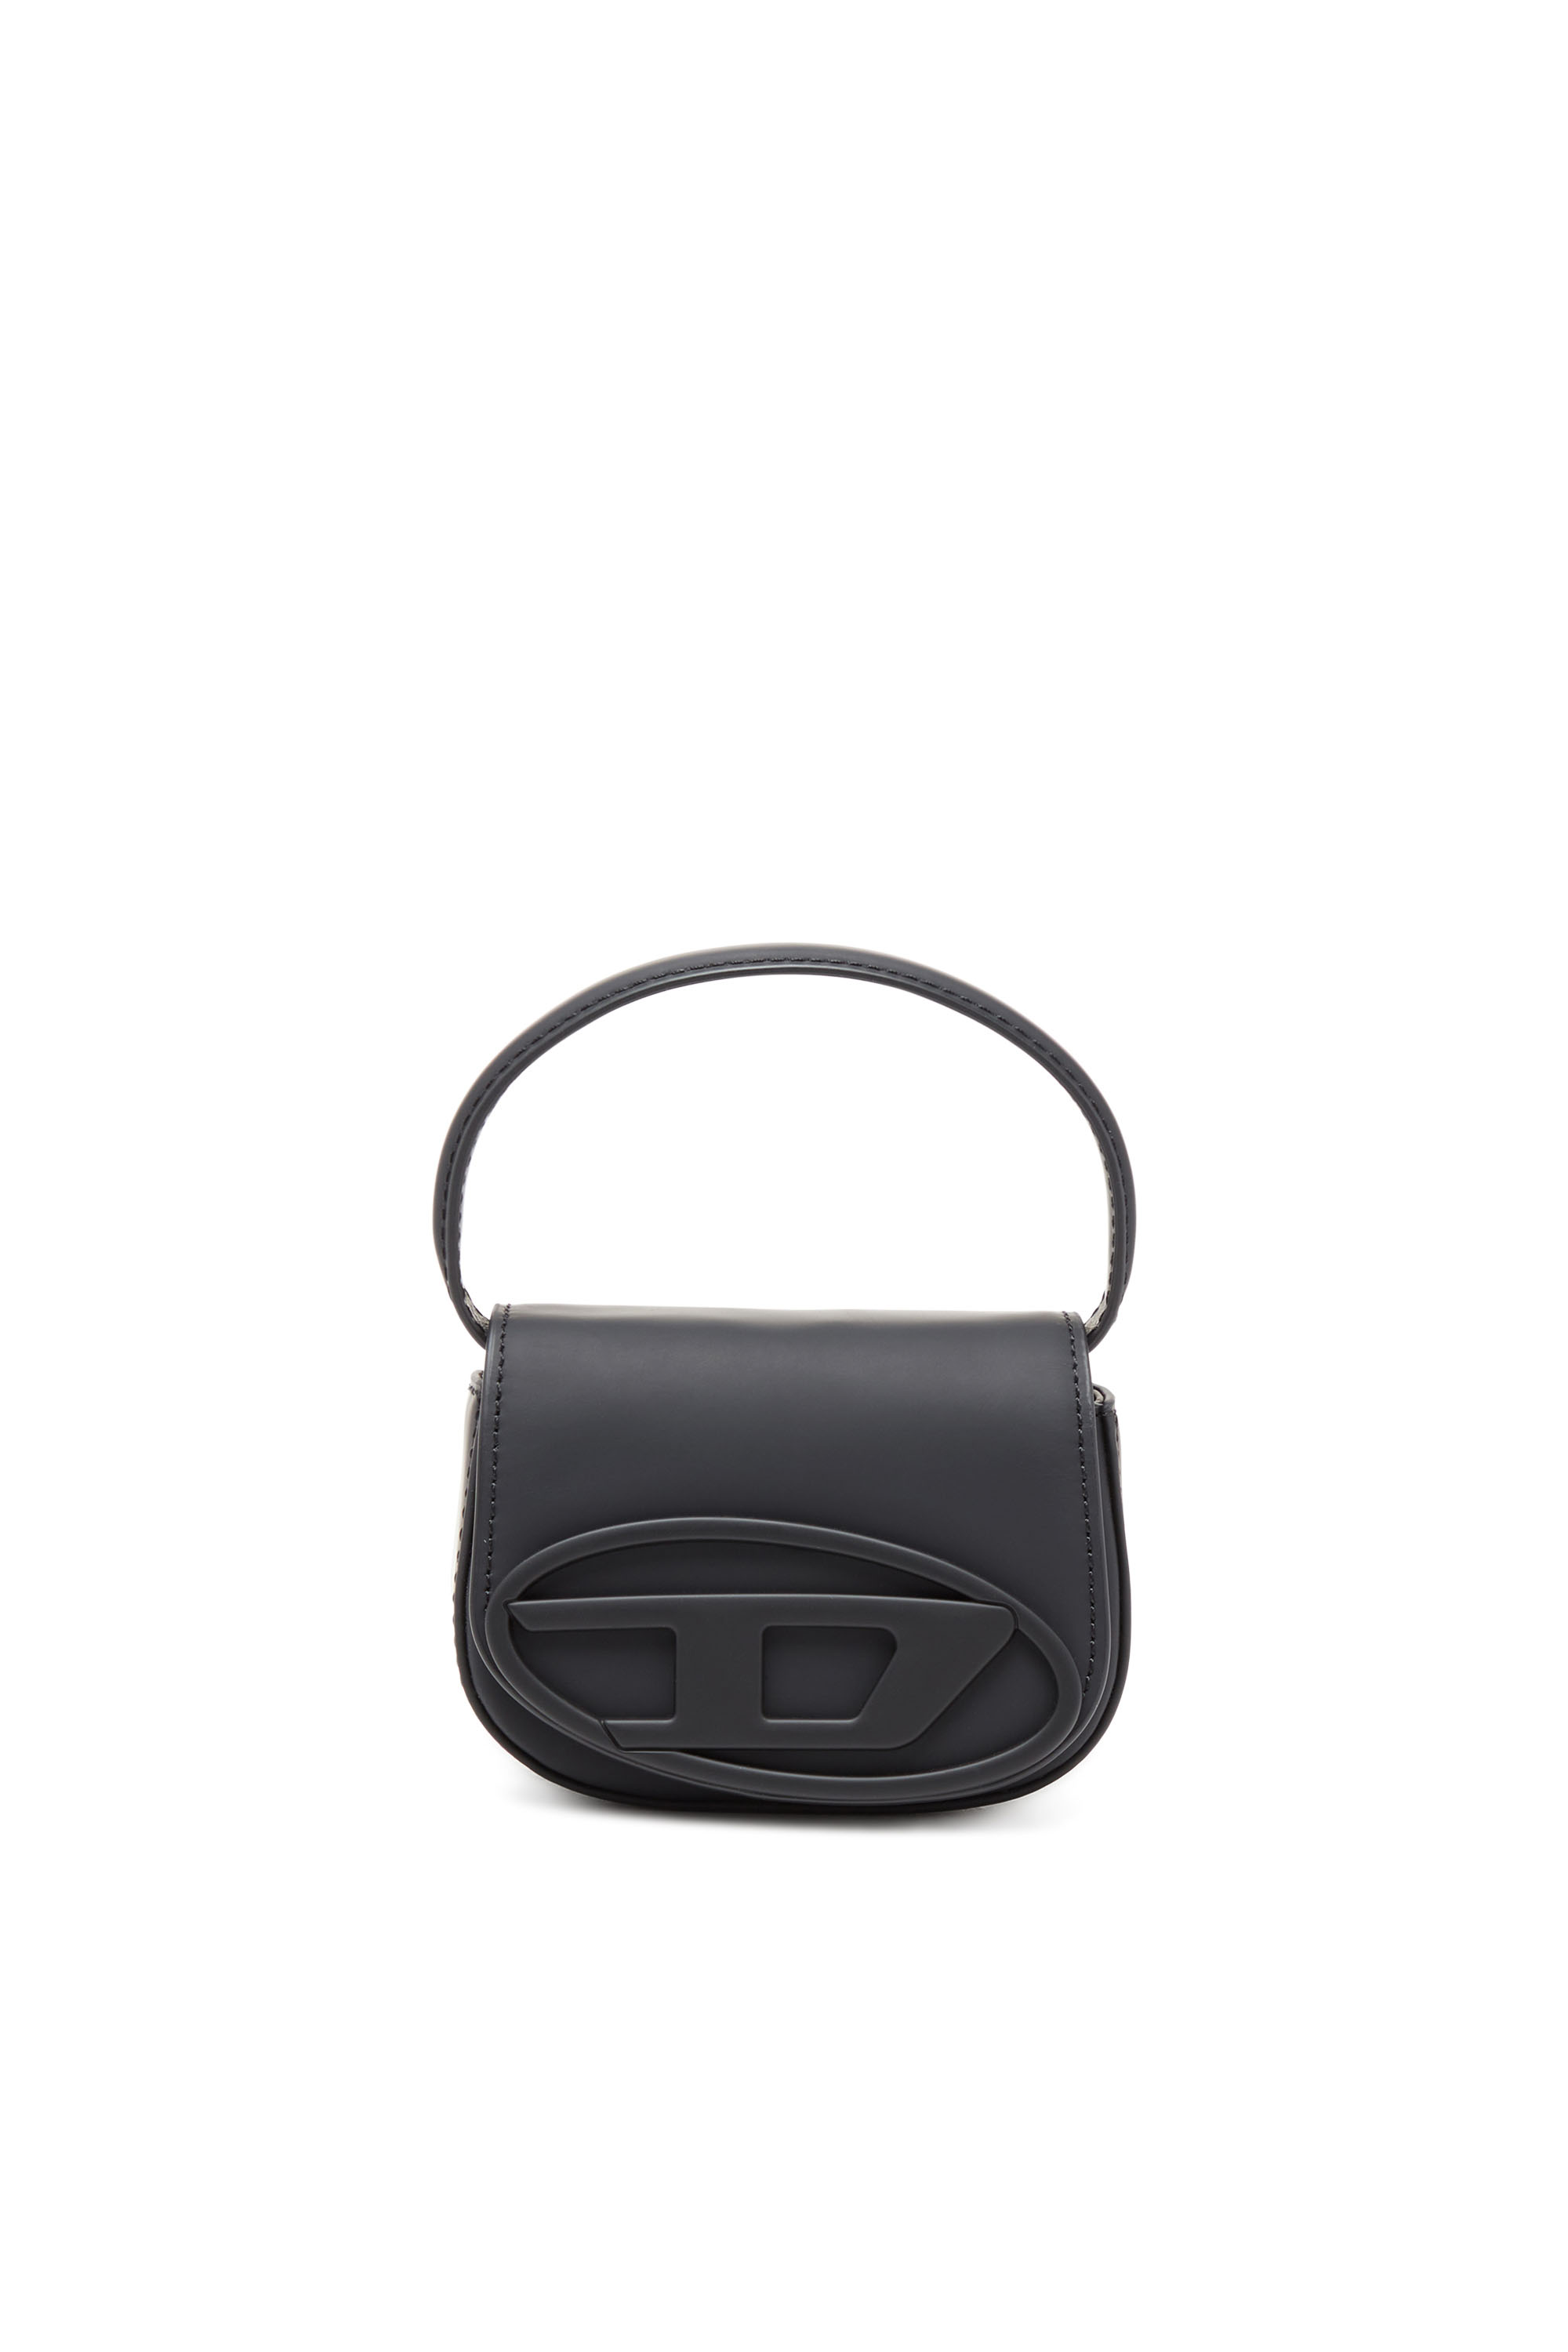 Diesel - 1DR XS, Woman 1DR Xs-Iconic mini bag in matte leather in Black - Image 7